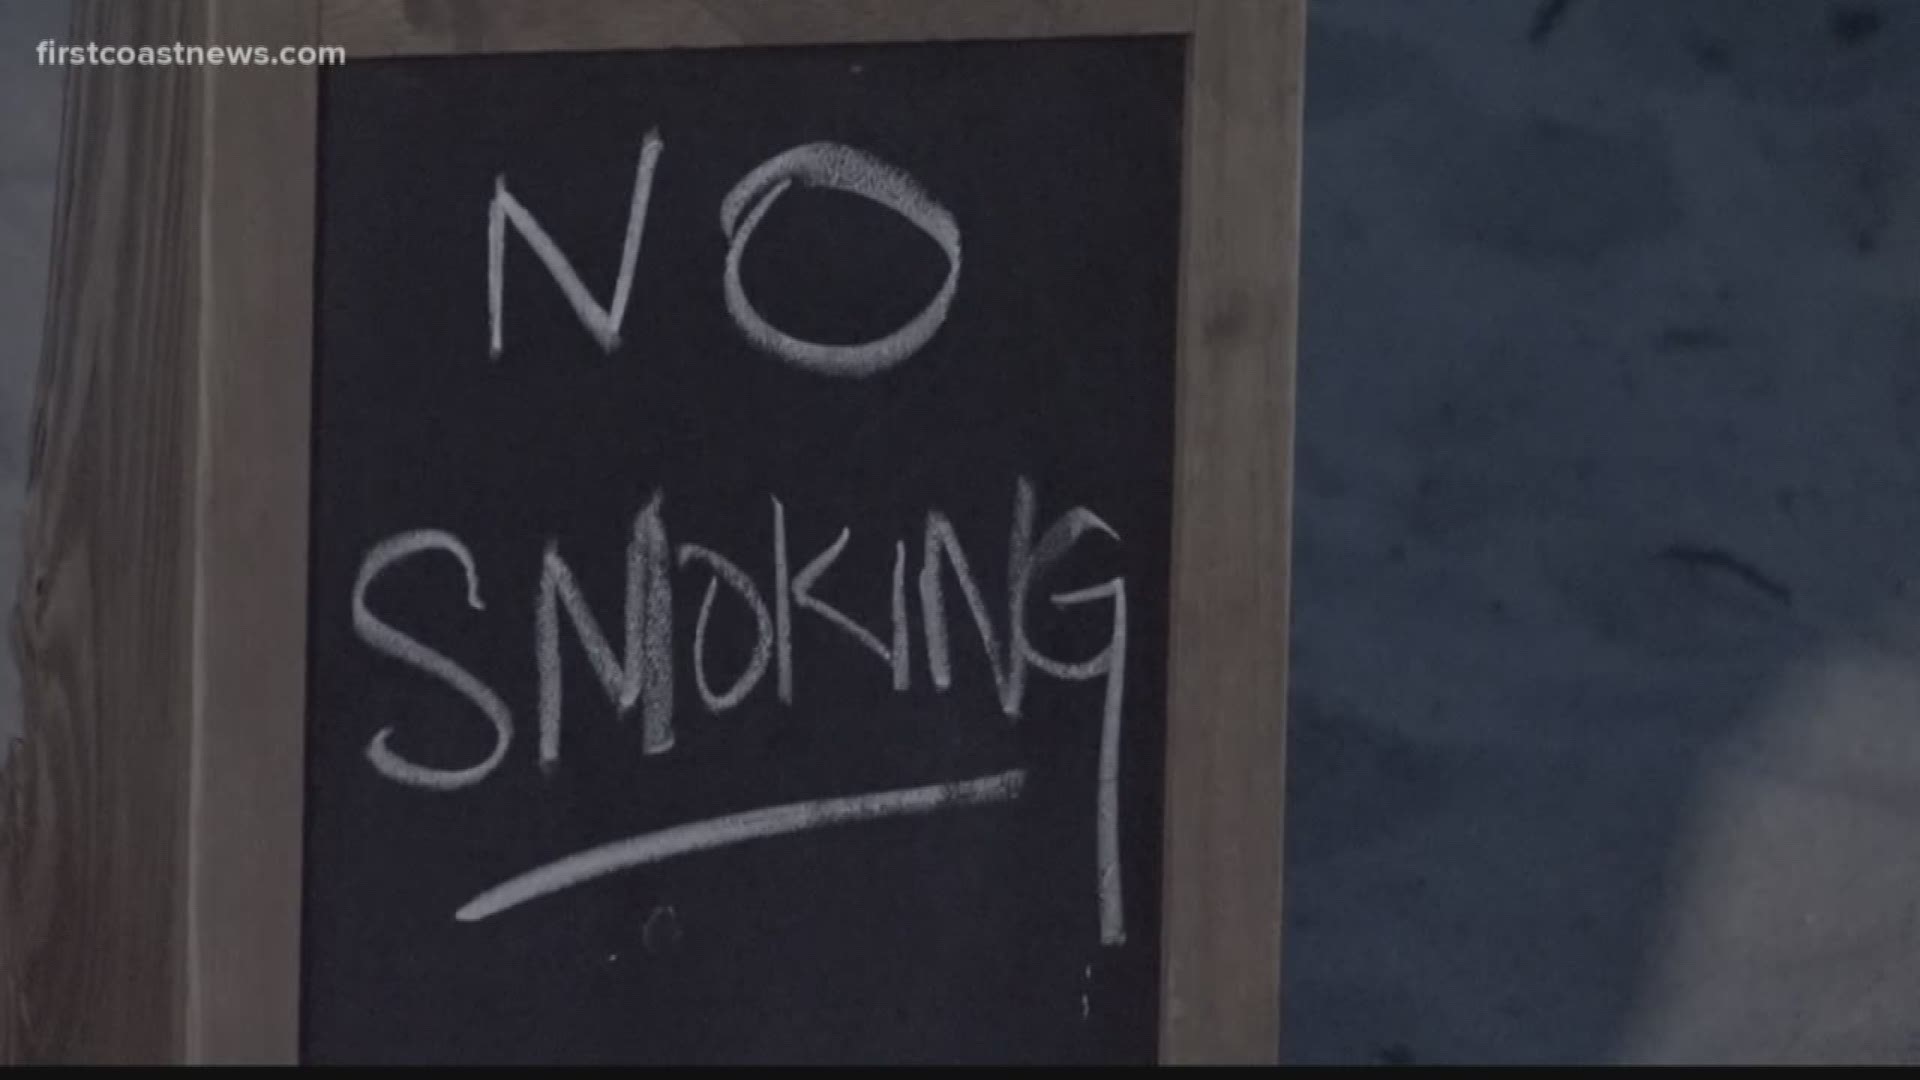 A new bill filed in the Florida Senate could soon make smoking a thing of the past along most of Florida's coastline.